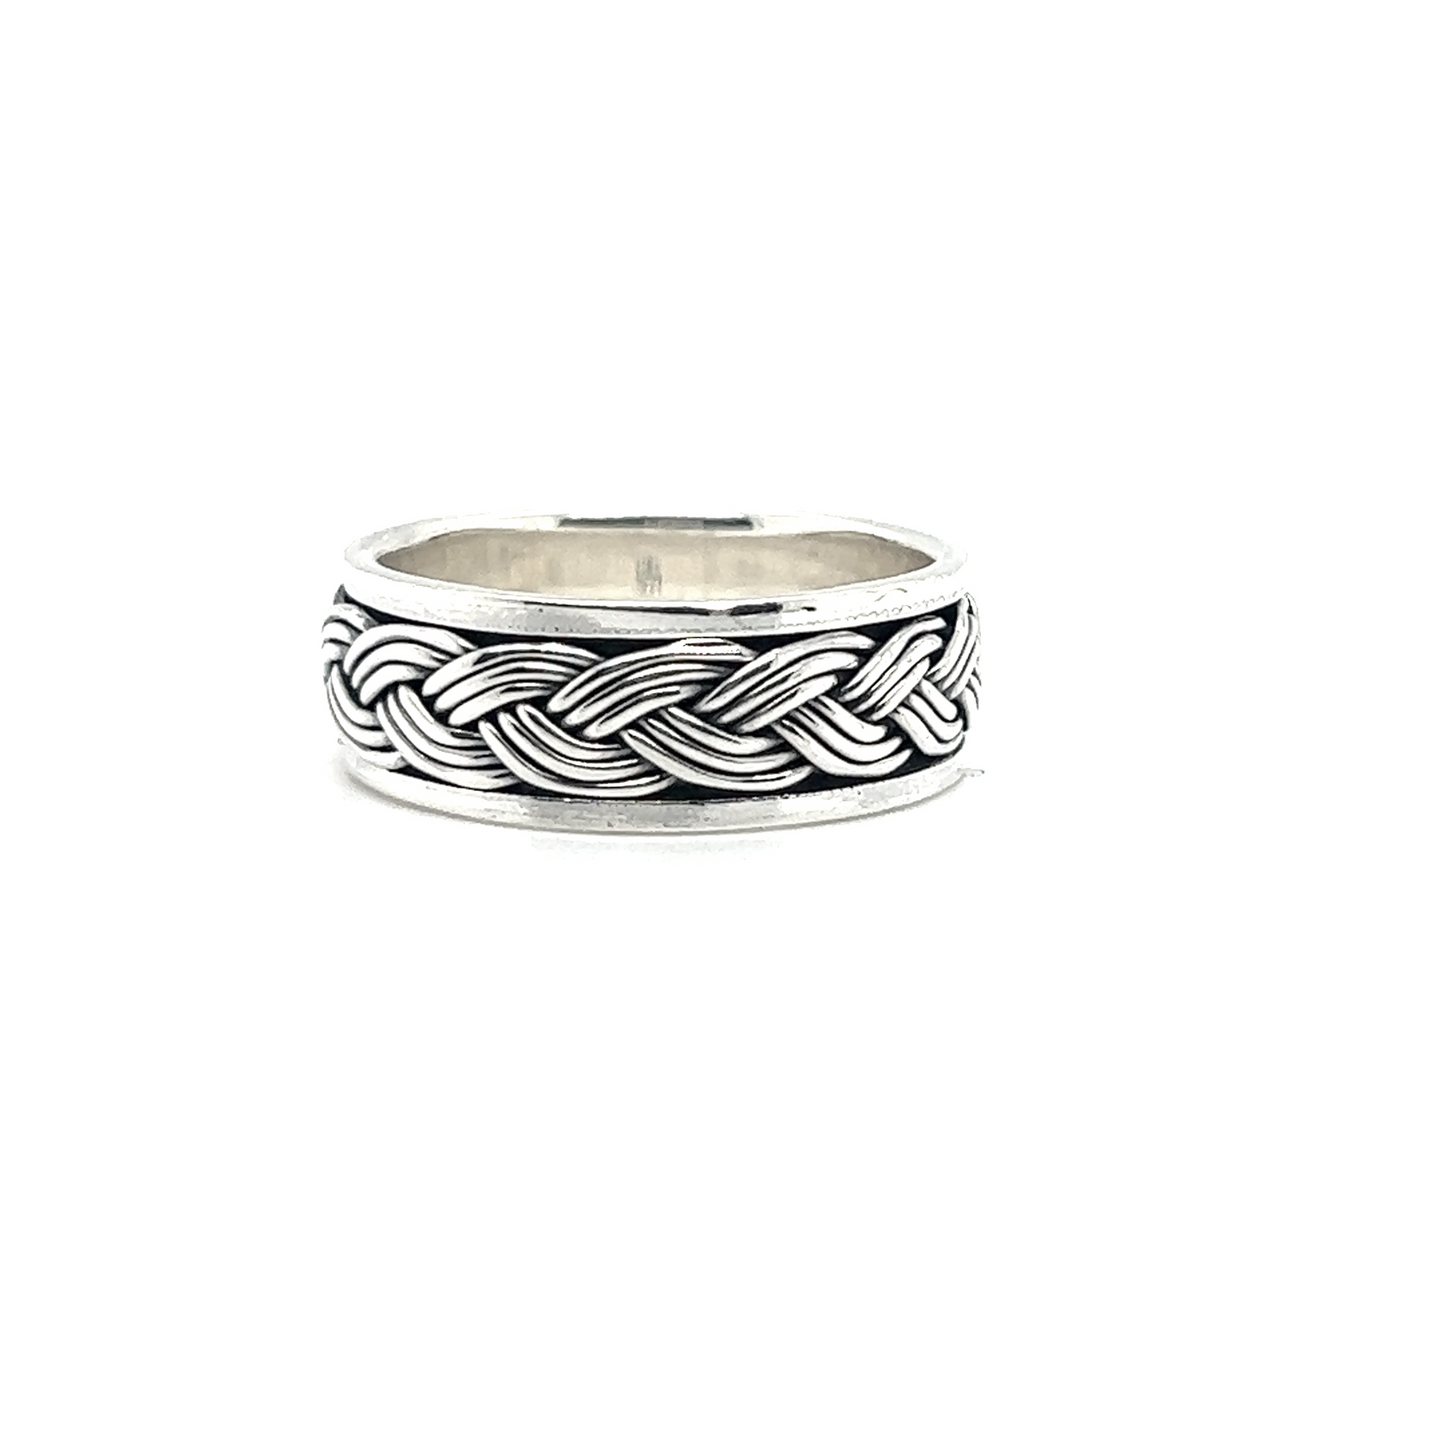 A minimalist silver ring with a Rope Spinner band.